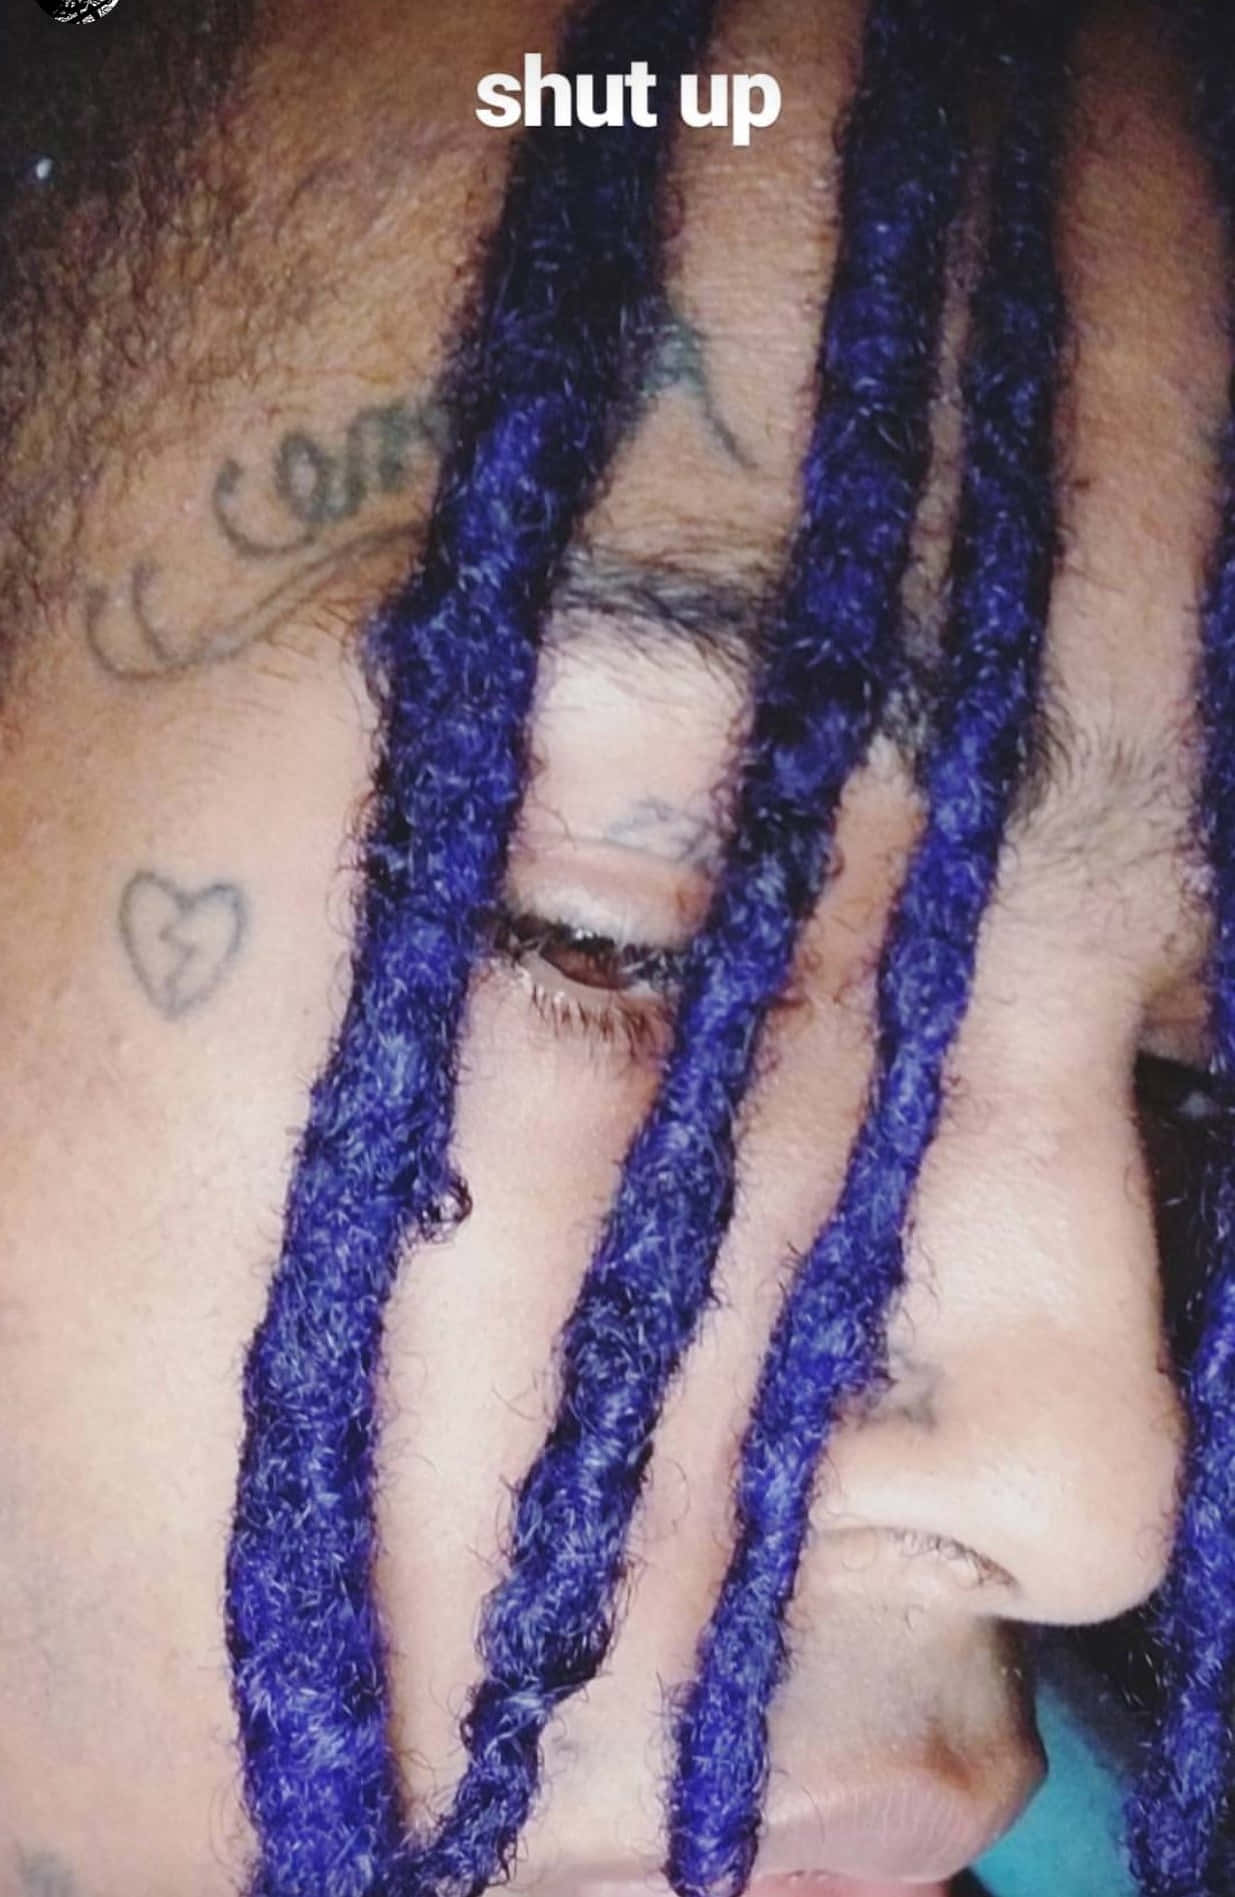 The late American rapper XXXTentacion sporting his iconic blue hair Wallpaper